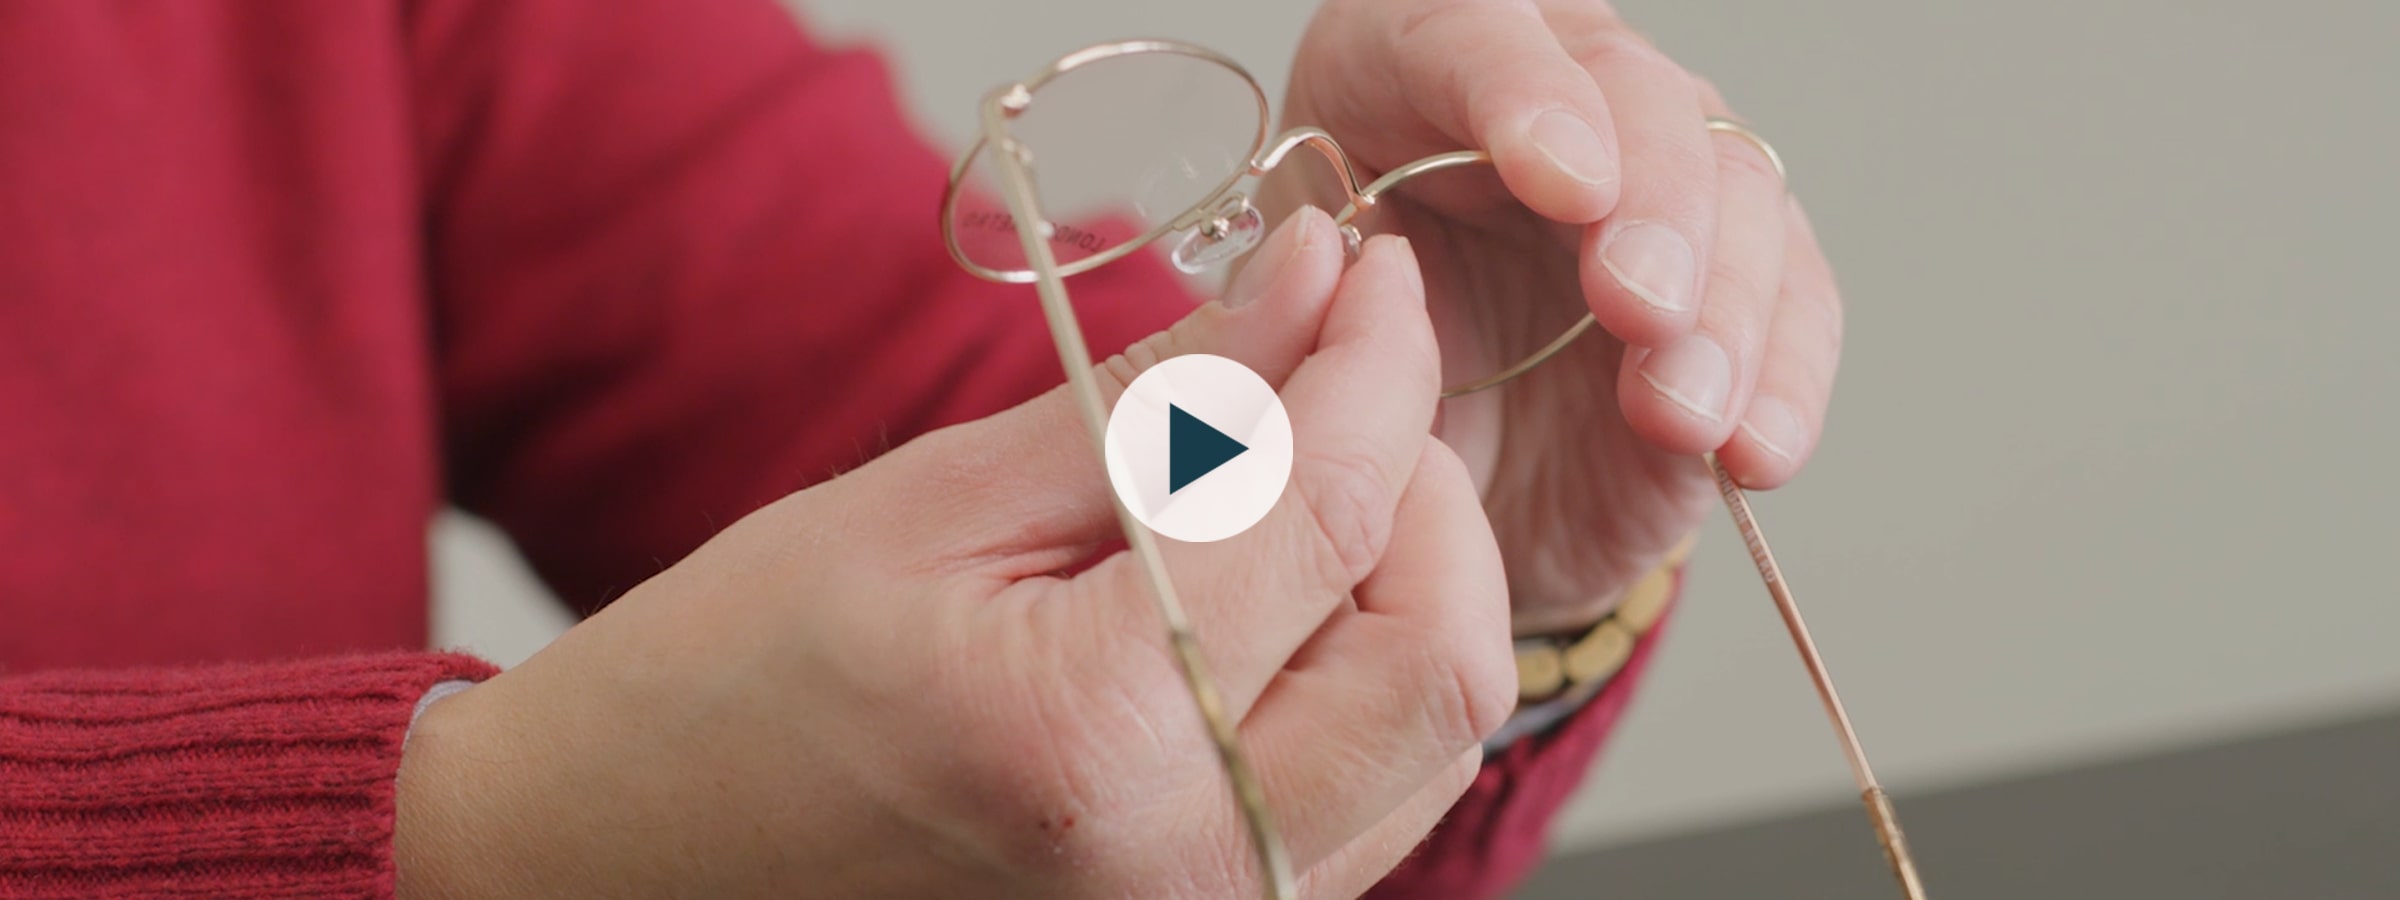 Ask the optician: How to adjust nose pads